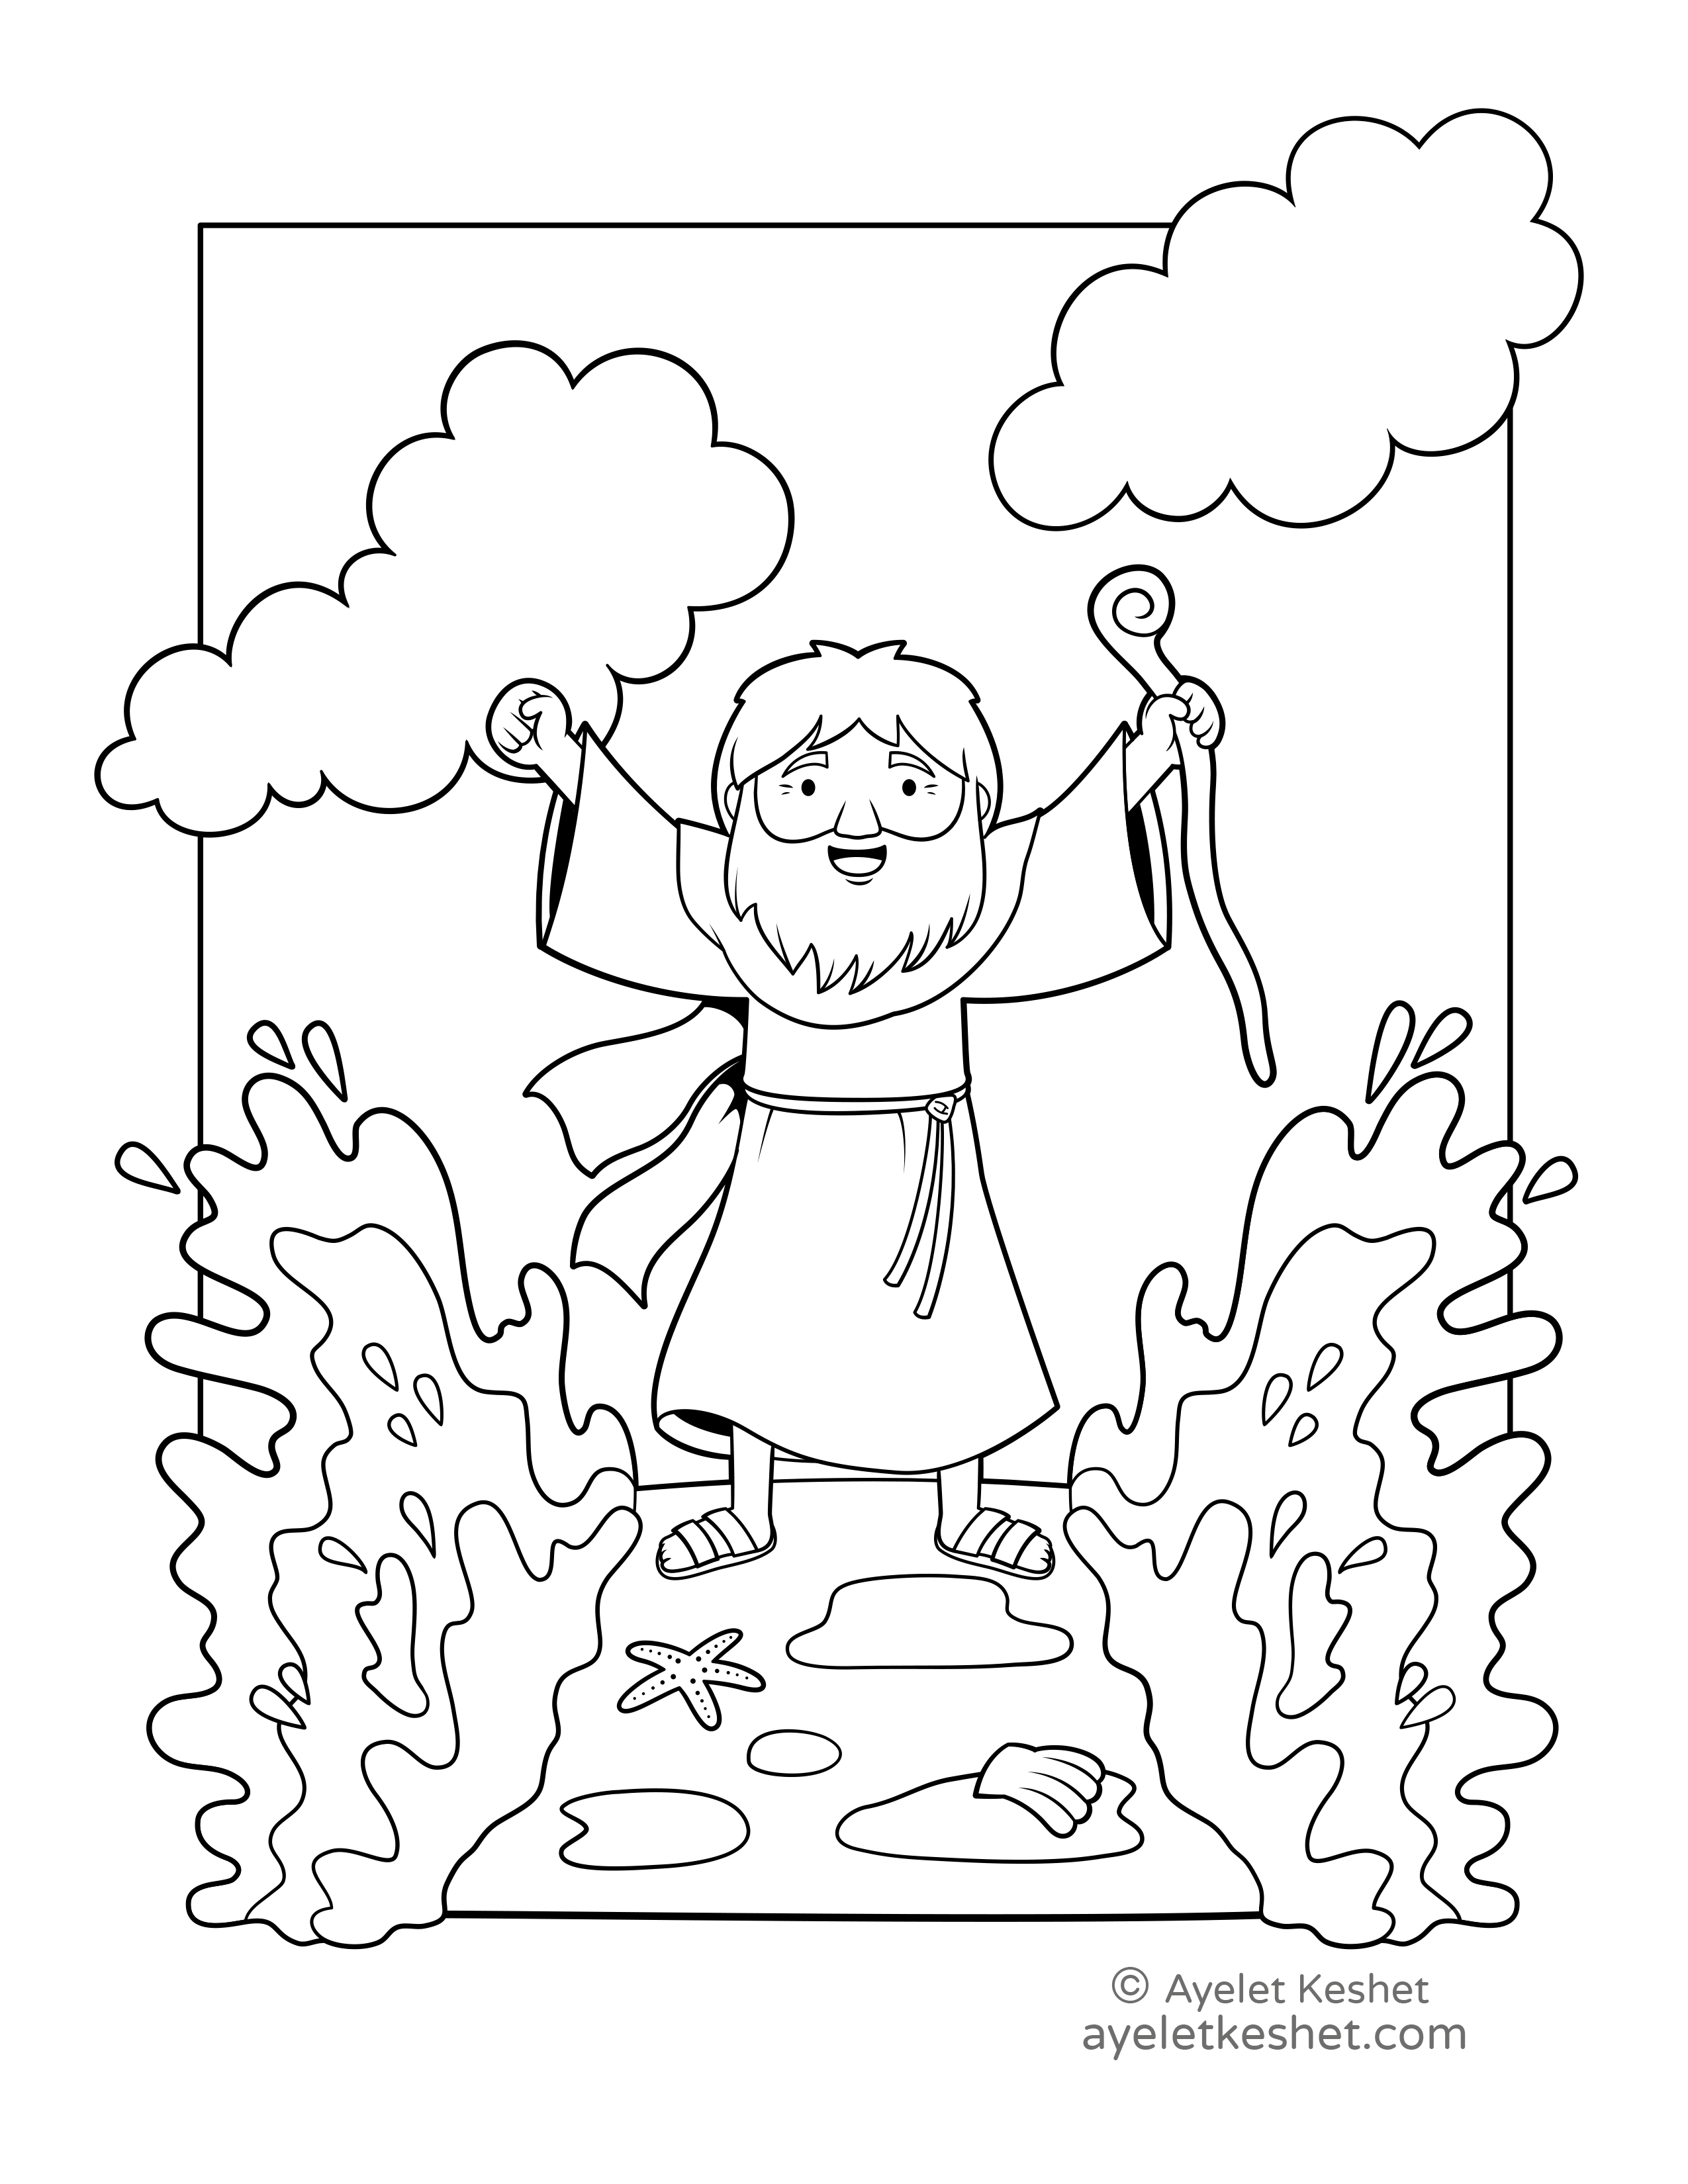 Passover coloring pages with cute illustrations - Ayelet Keshet